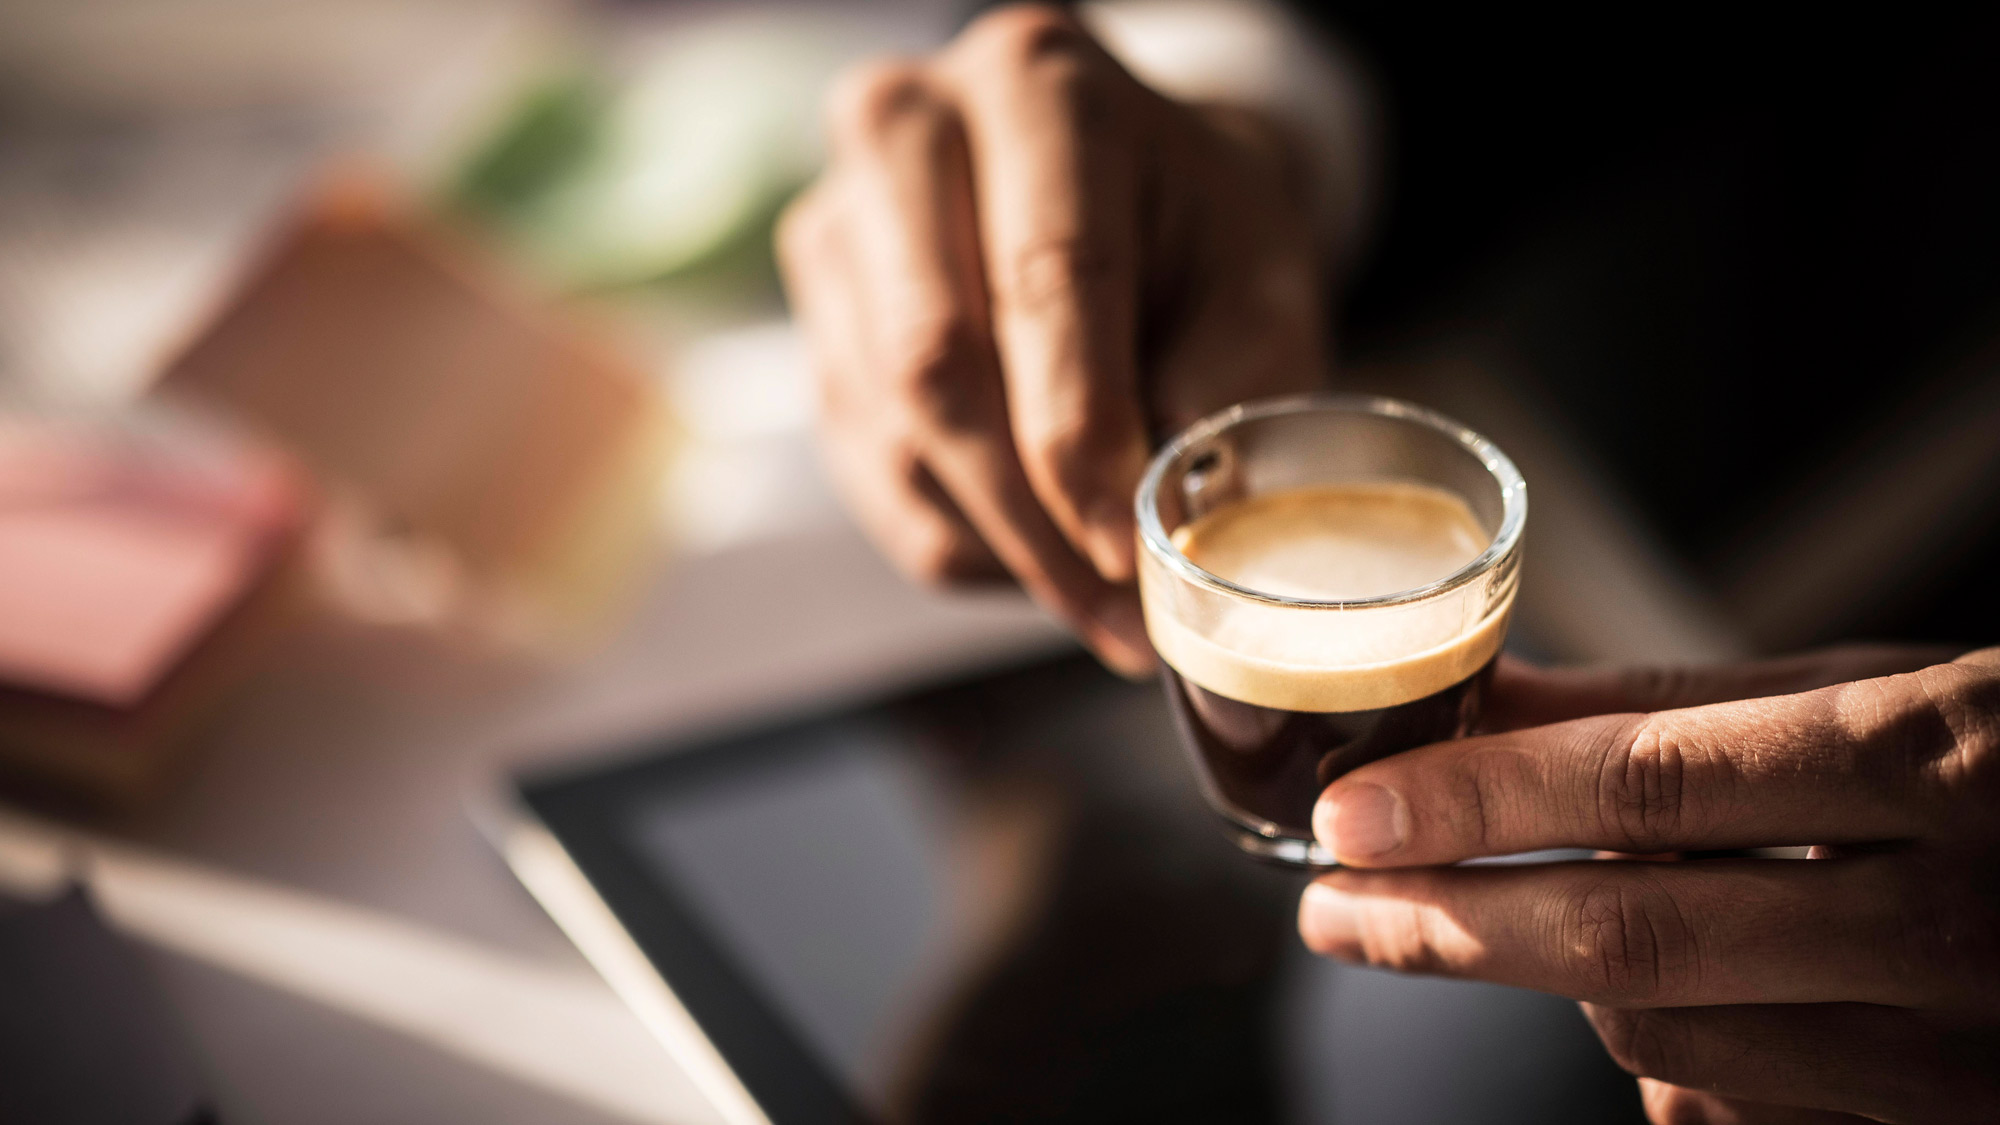 An espresso in a glass cup being held by two hands